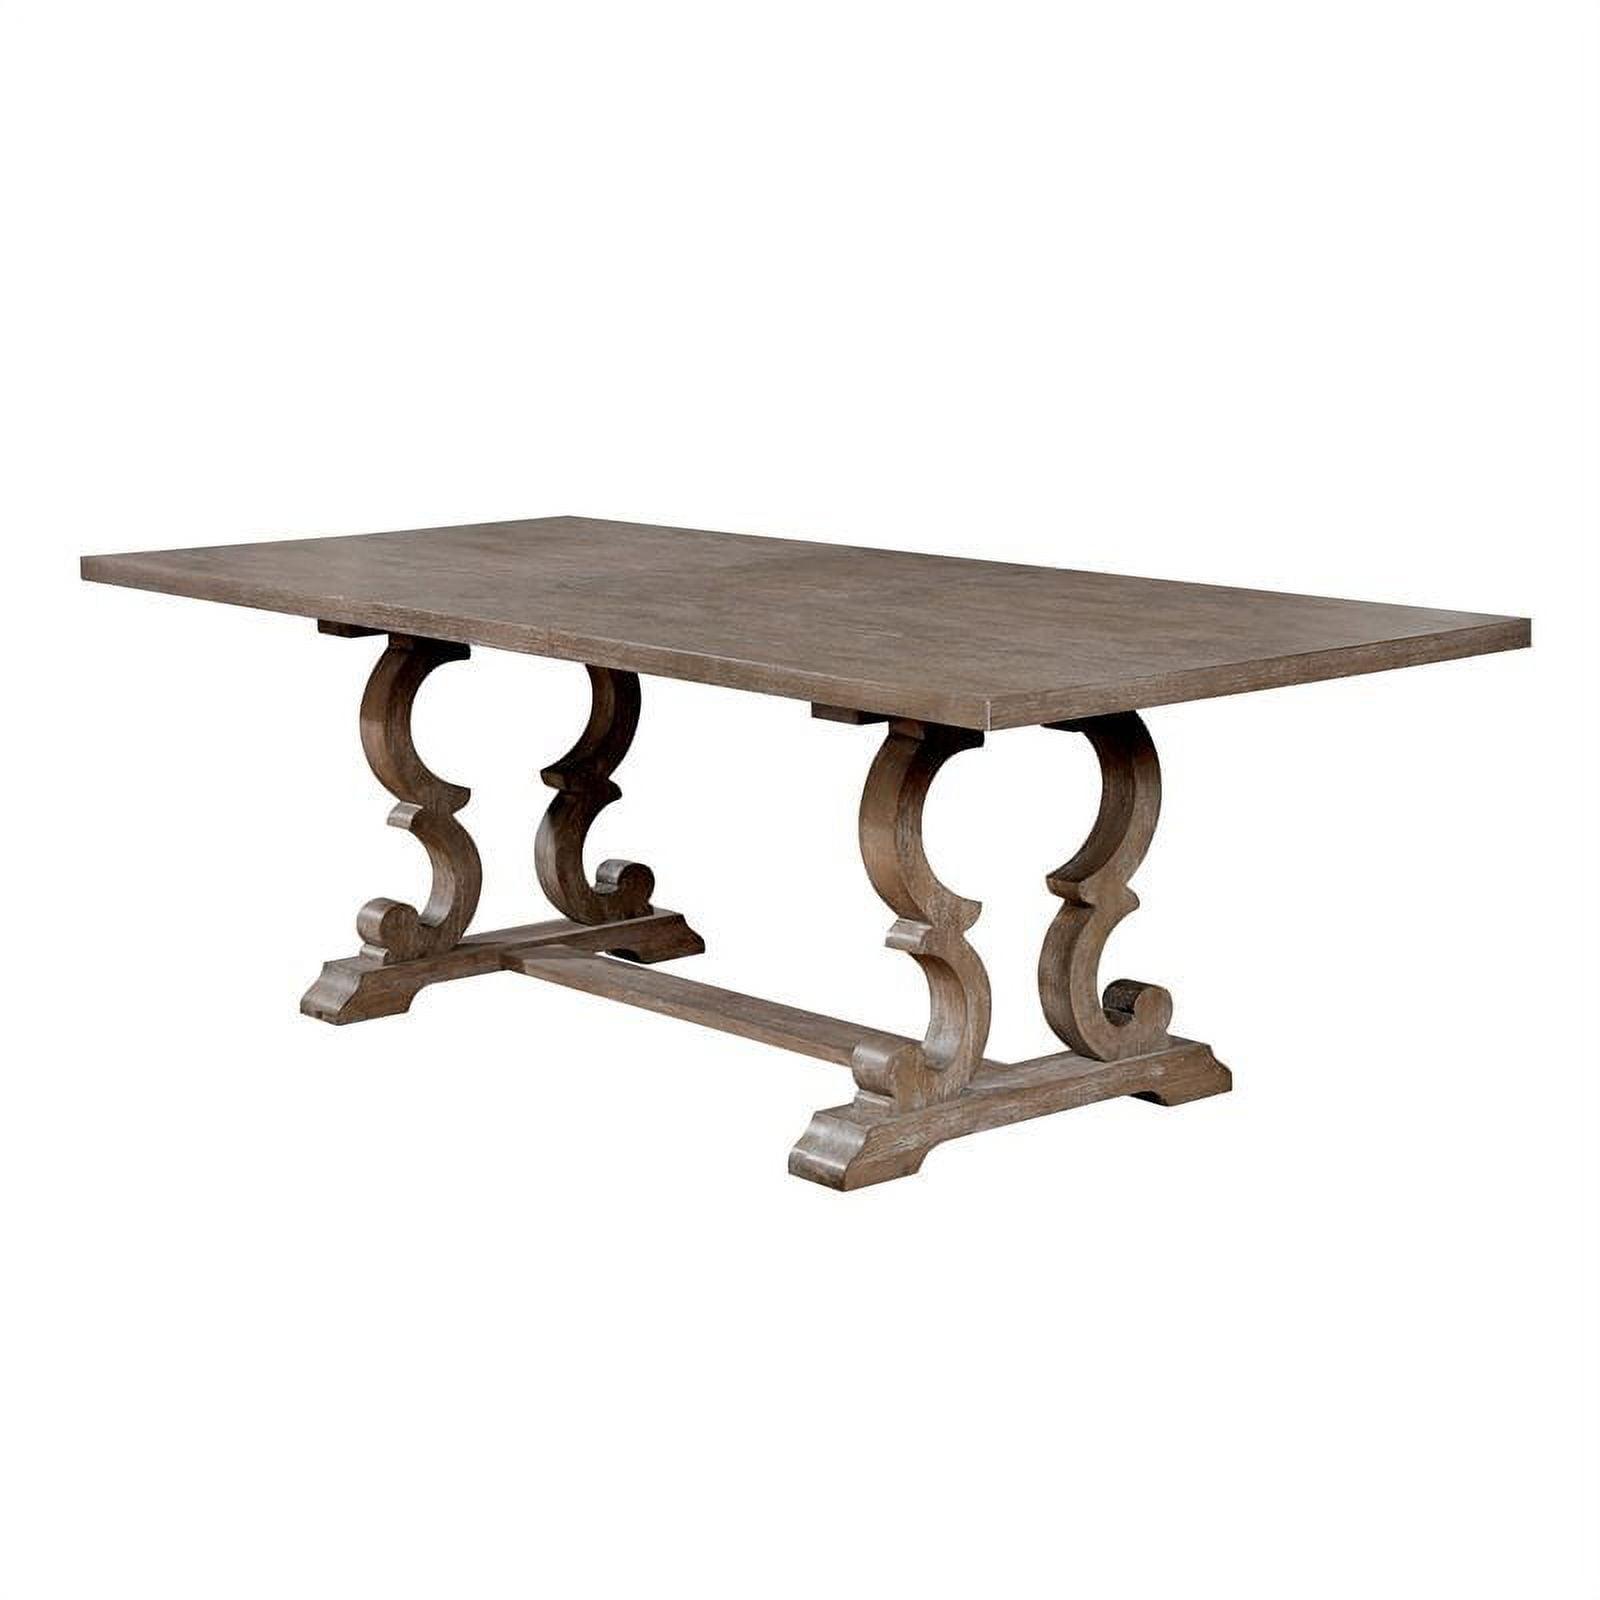 Chateau Reclaimed Wood Extendable Dining Table in Rustic Natural Tone